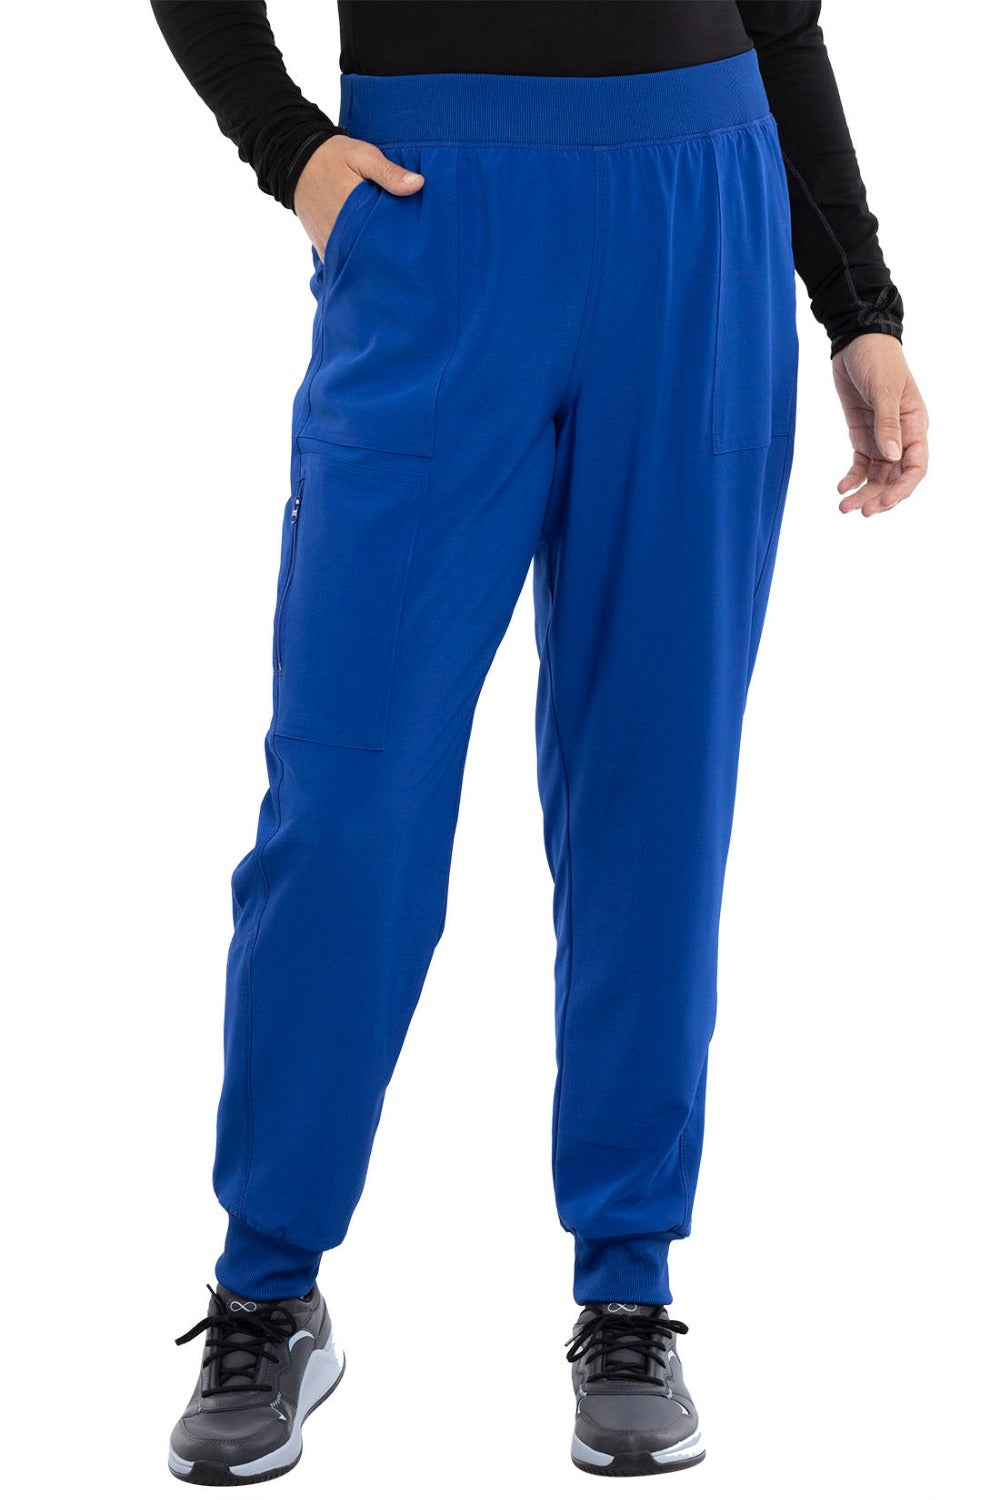 Cherokee Allura Petite Scrub Pant Pull On Jogger in Galaxy Blue at Parker's Clothing and Shoes.